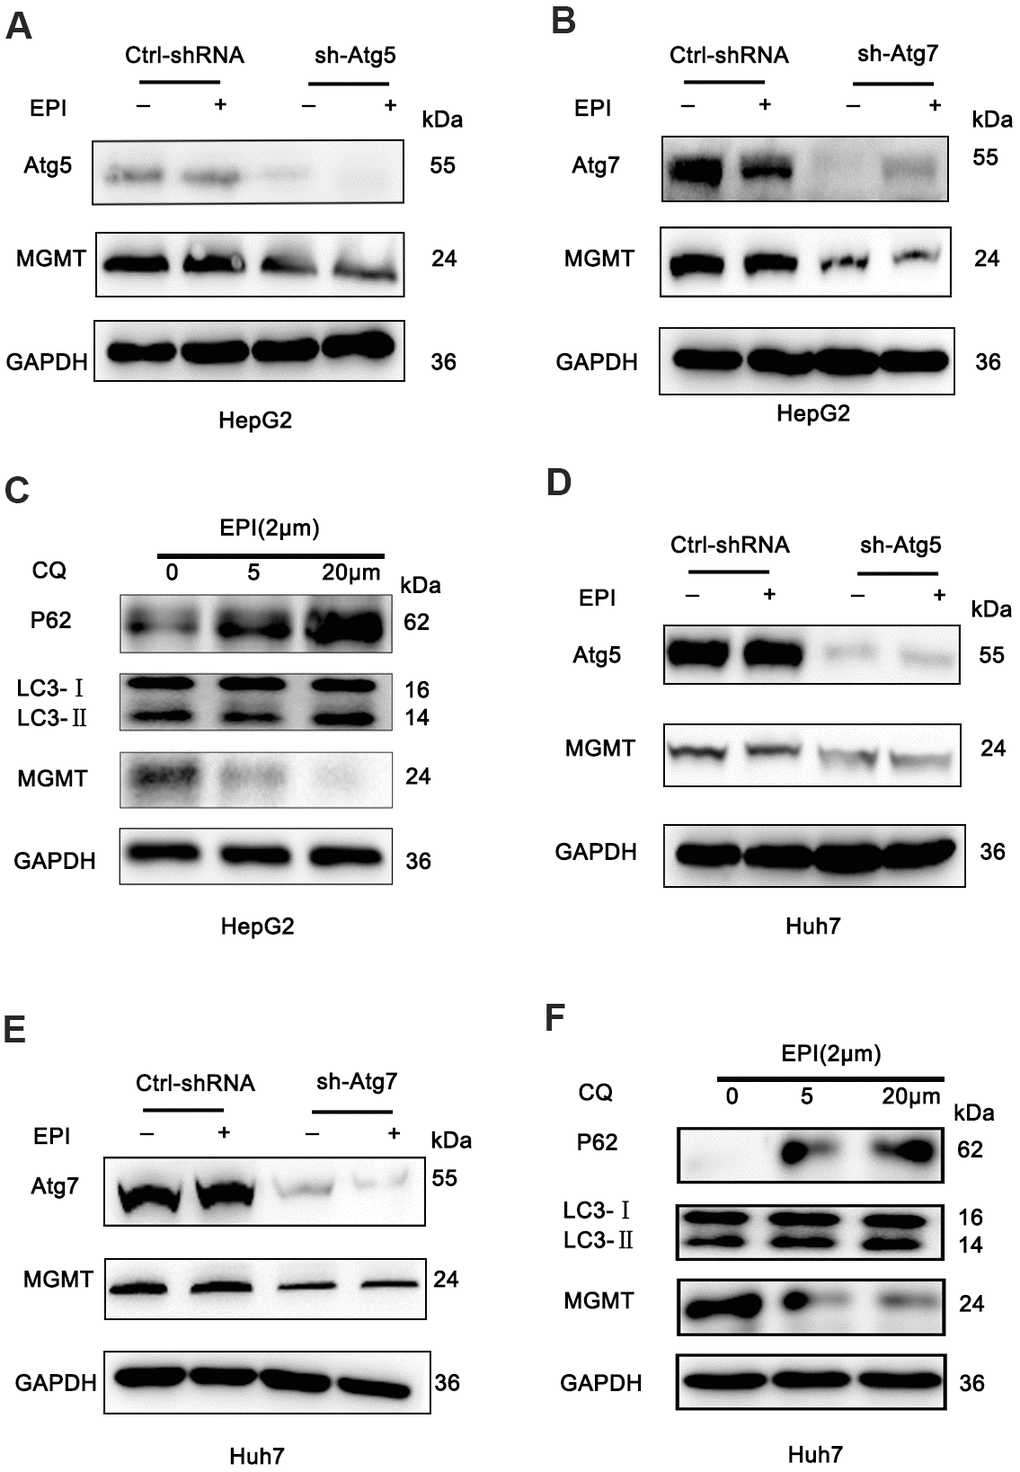 Loss of autophagy decreases MGMT expression. (A, B) HepG2 cells were infected with sh-Atg5/Atg7 HepG2 or empty lentivirus vector, treated with 2 μM epirubicin for 24 h, and levels of MGMT were determined by western blot assay; GAPDH was used as a loading control. (C) Western analysis of MGMT in wild-type HepG2 cells treated with 2 μM epirubicin for 24 h, followed by 24 h incubation with CQ. (D, E) Western analysis of MGMT in wild-type Huh7 cells infected with Atg5-shRNA lentivirus or Atg7-shRNA lentivirus, and treated with 2 μM epirubicin for 24 h. (F) Western analysis of MGMT in wild-type Huh7 cells treated 24 h with 2 μM epirubicin, followed by 24 h incubation with the indicated CQ concentrations.